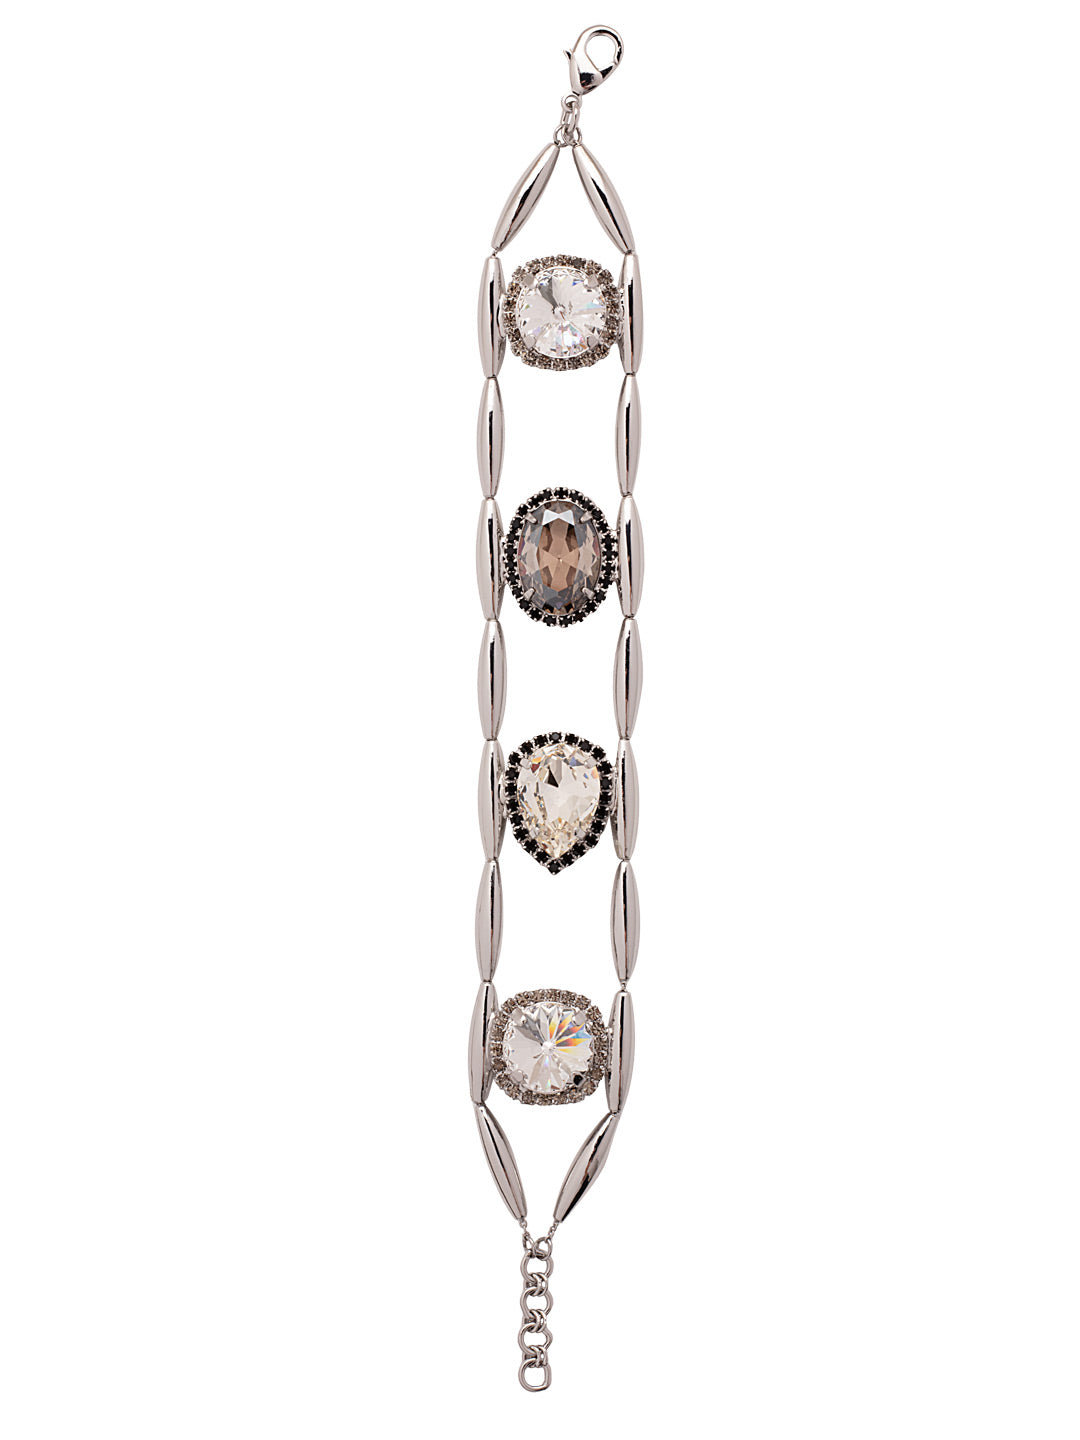 Giselle Tennis Bracelet - BFC80PDSNI - <p>The Giselle Tennis Bracelet features a row of assorted halo cut crystals nestled between tubular chains, secured by a lobster claw clasp on an adjustable chain. From Sorrelli's Starry Night collection in our Palladium finish.</p>